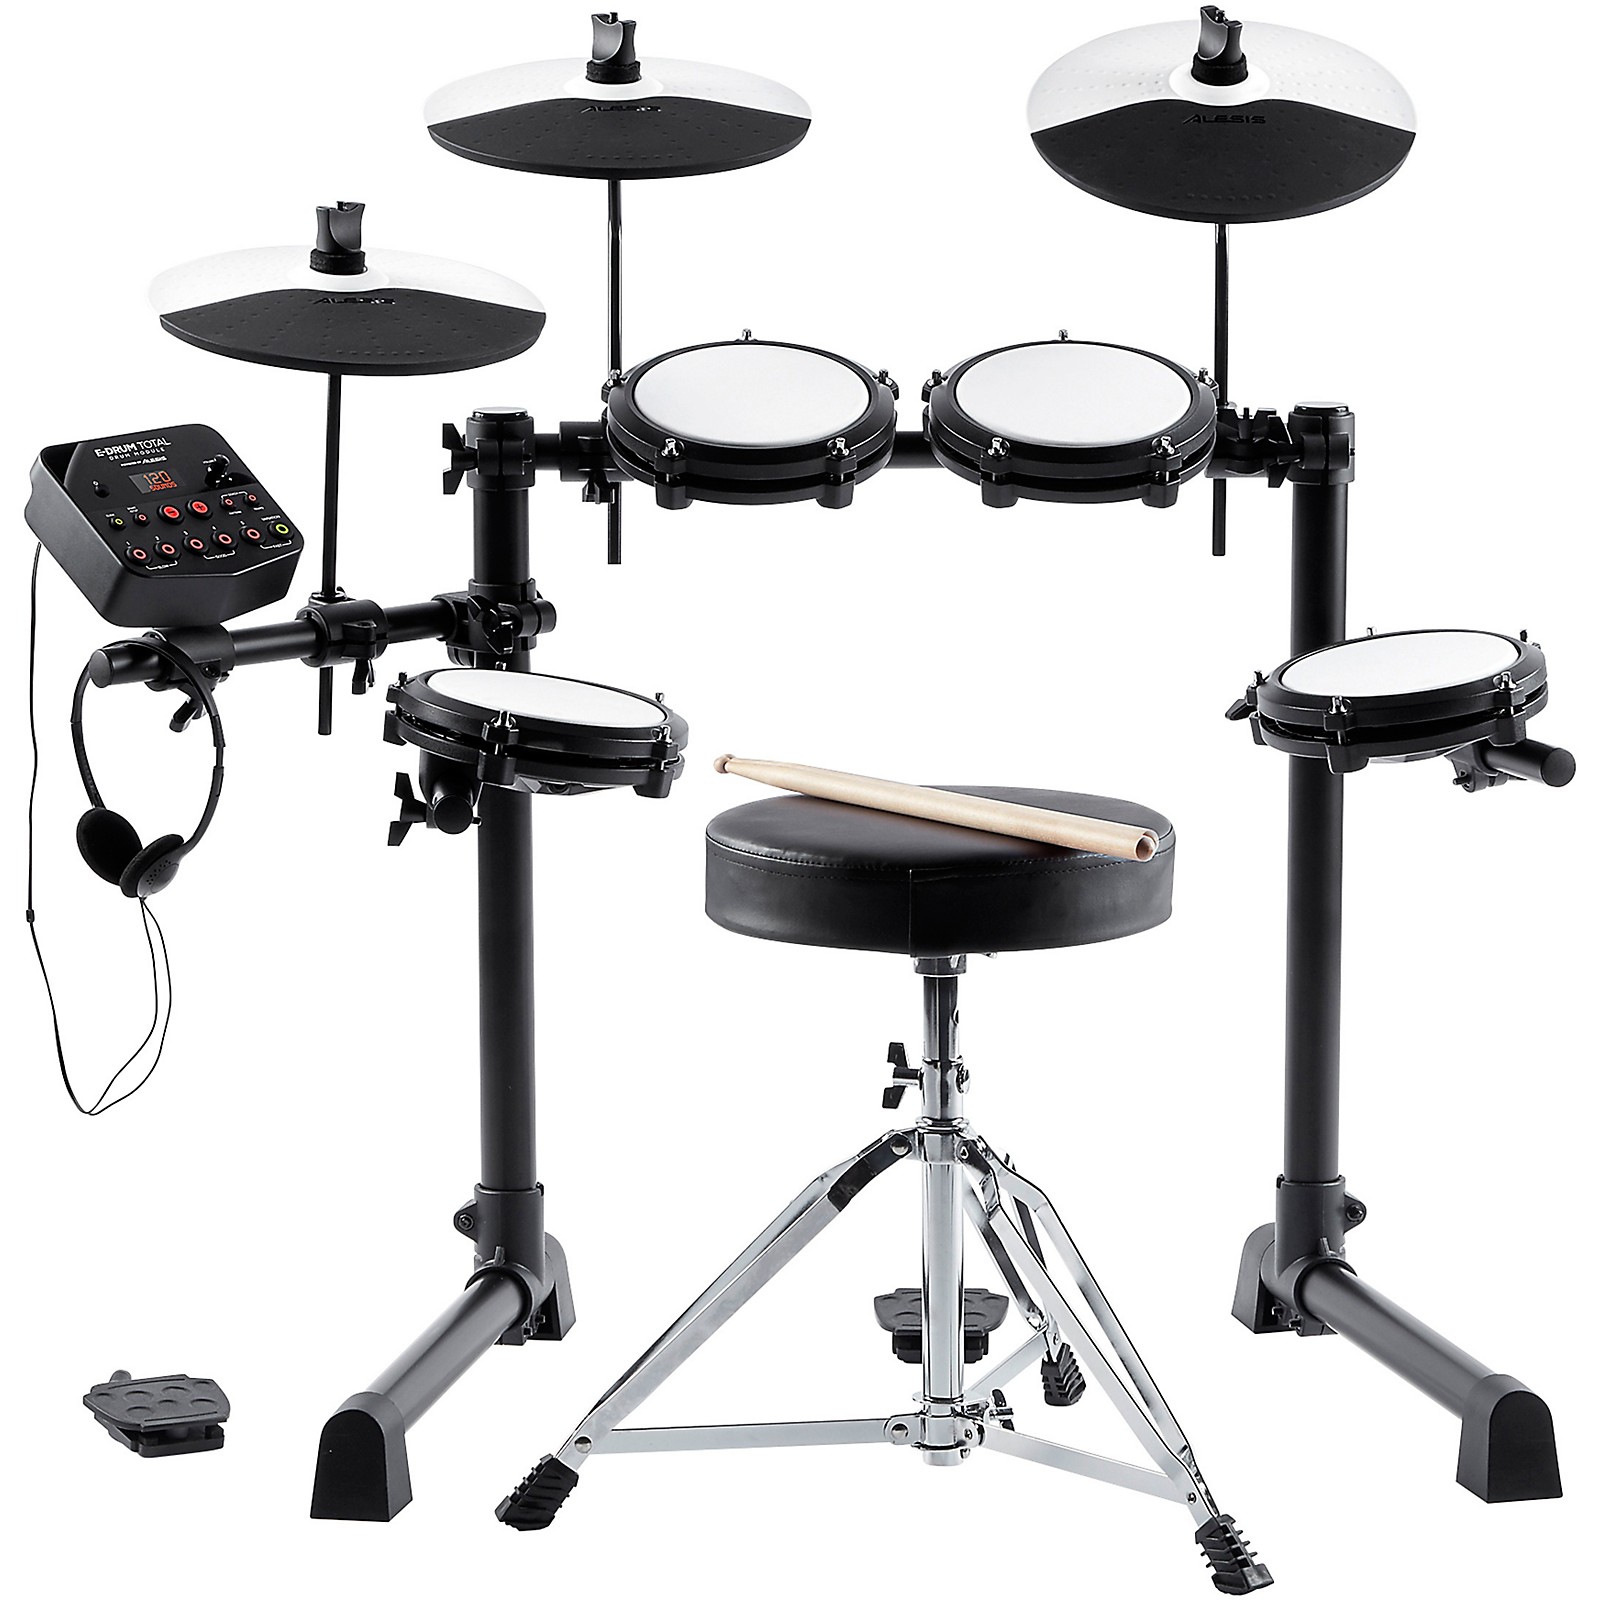 Acoustic Drum Kit Sounds & RockJam DP-001 Adjustable Drum Stool Drum Throne with Padded Seat Alesis CompactKit 7 Tabletop Electric Drum Set with 265 Electronic 